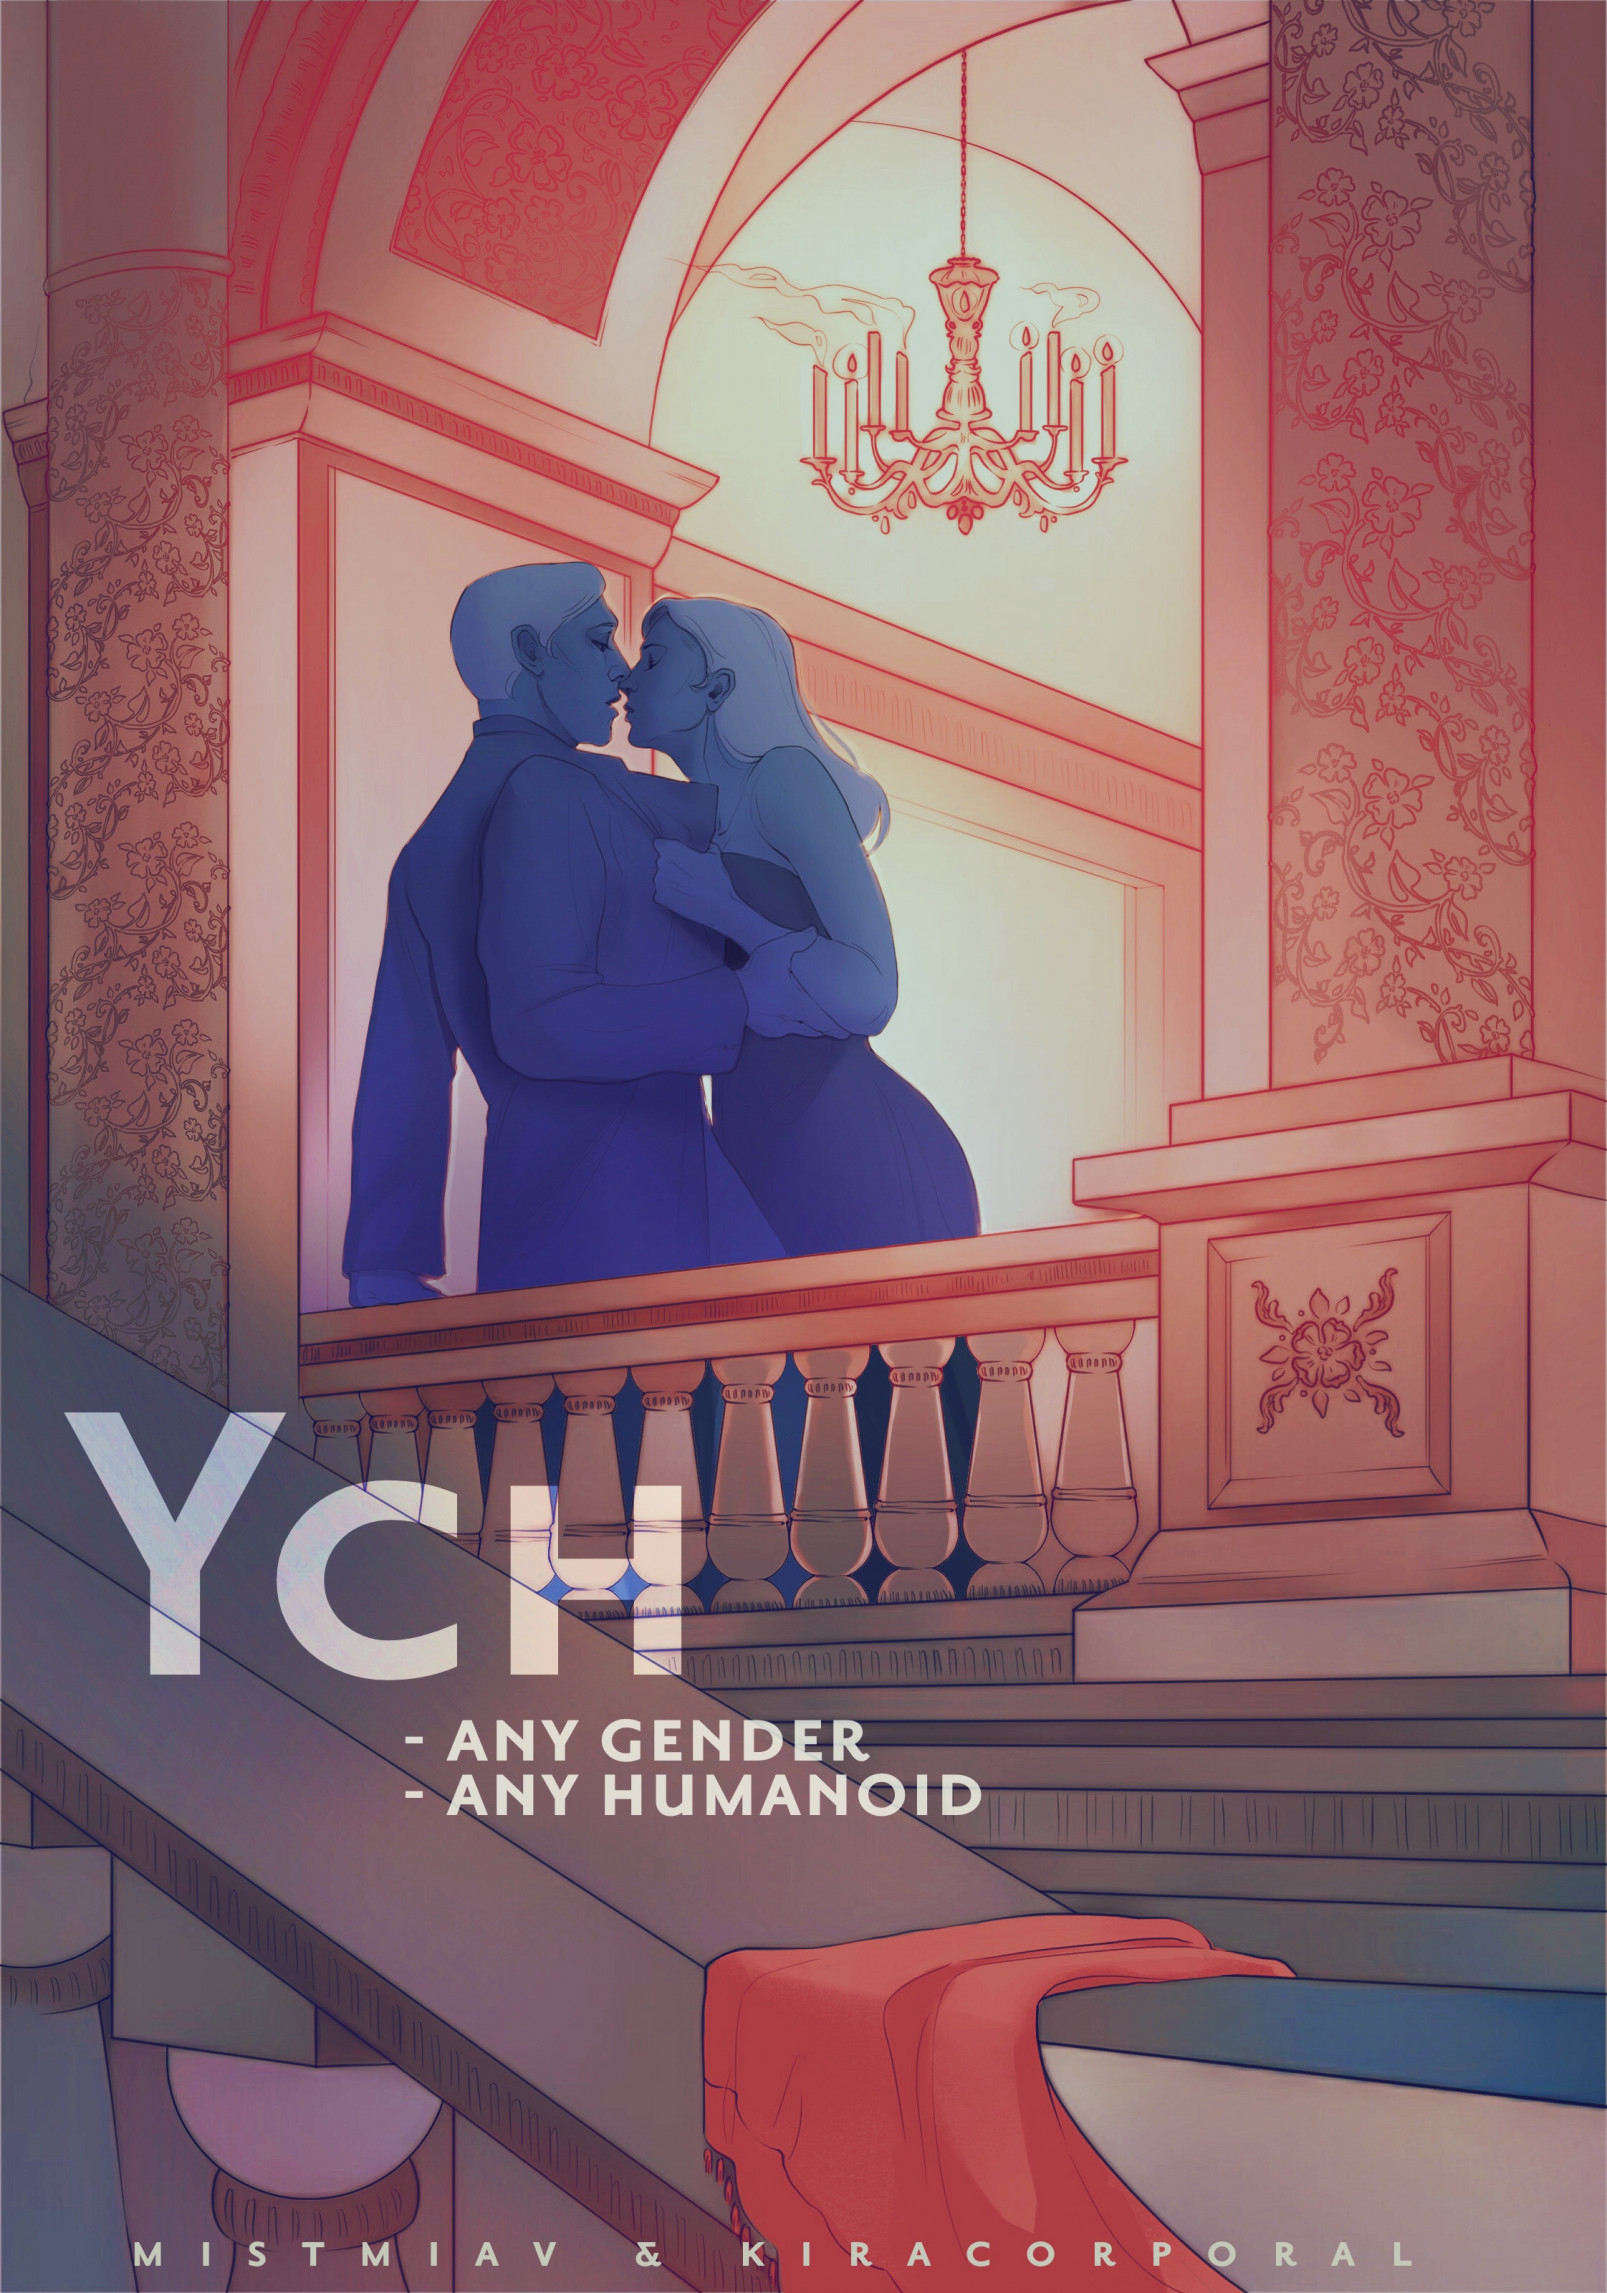 Humanoid couple love - YCH.Commishes